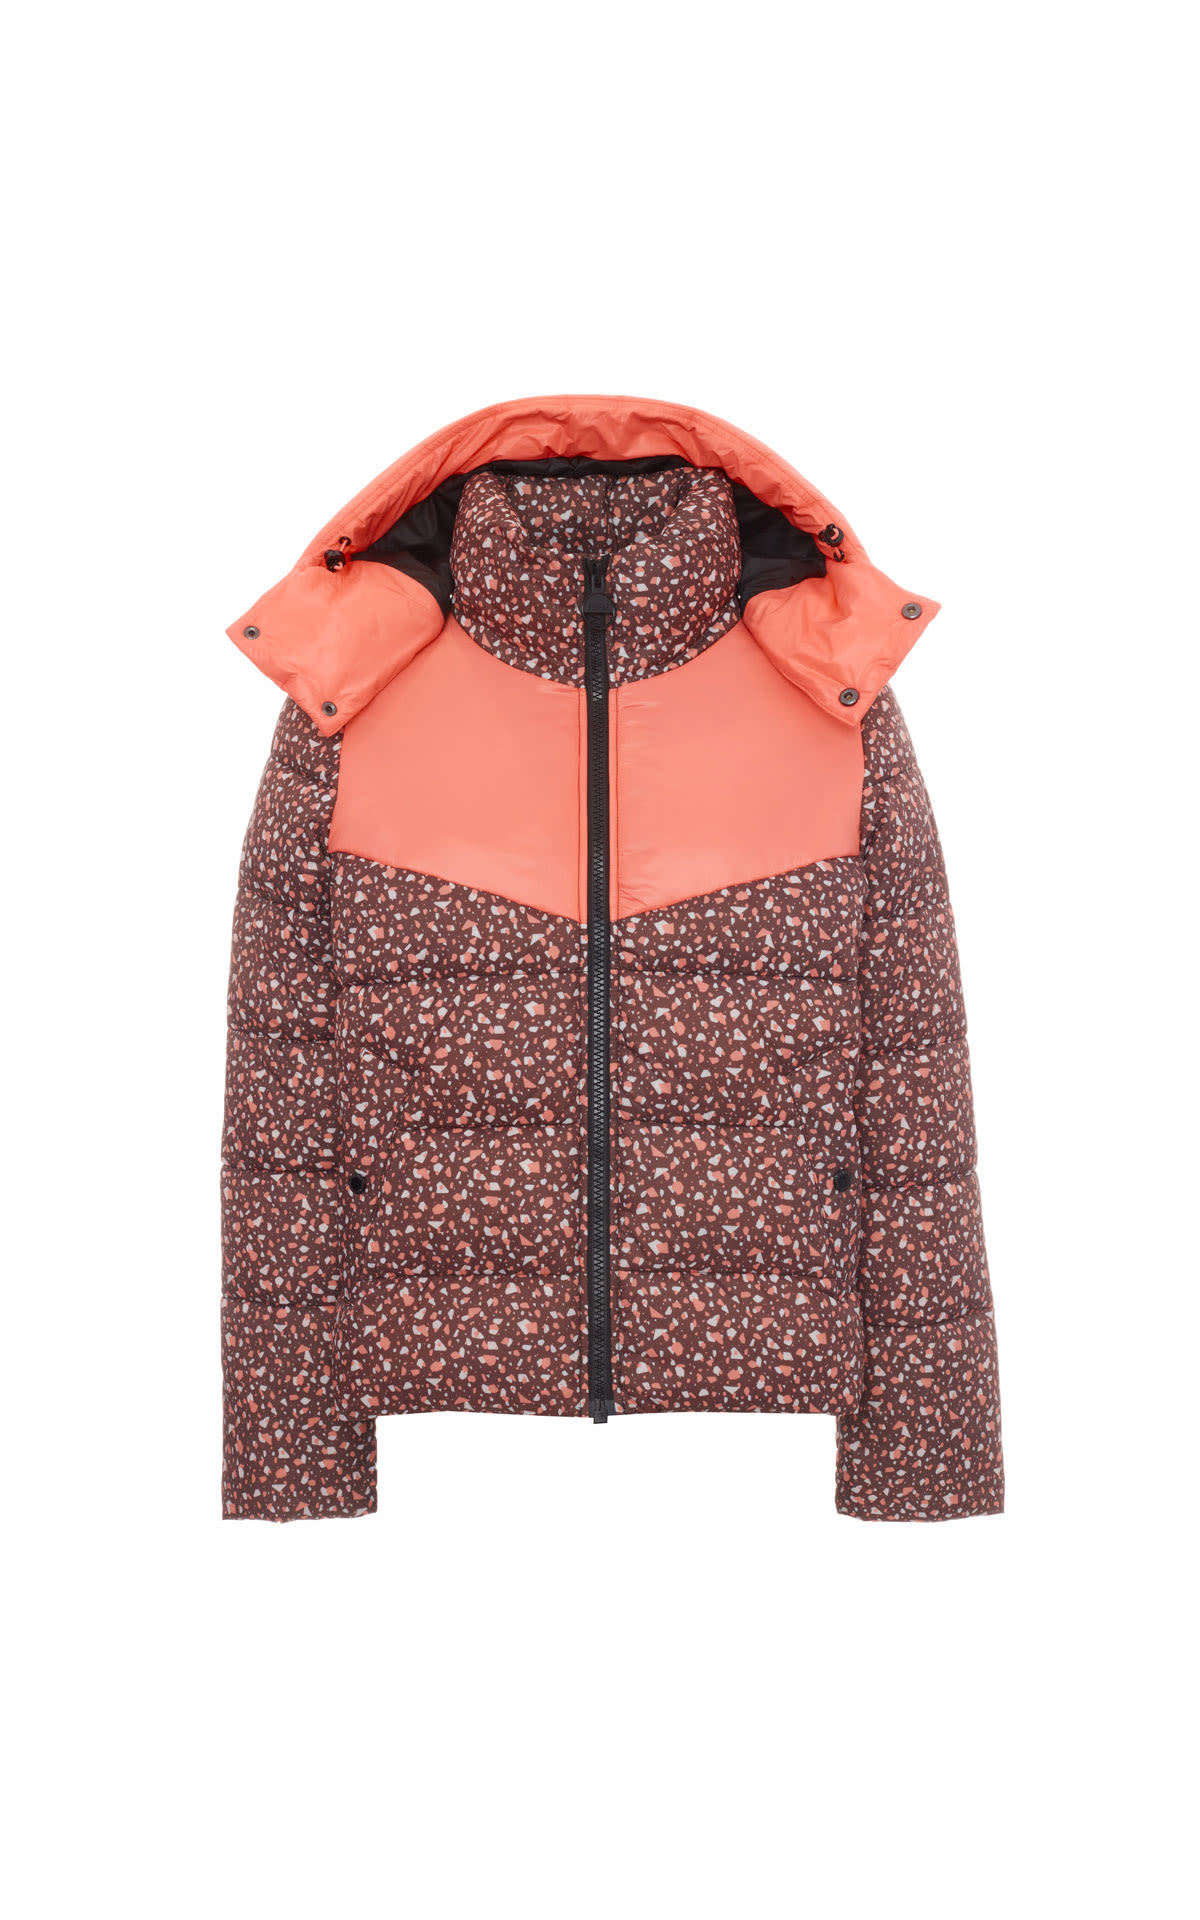 Barbour Printed puffer from Bicester Village